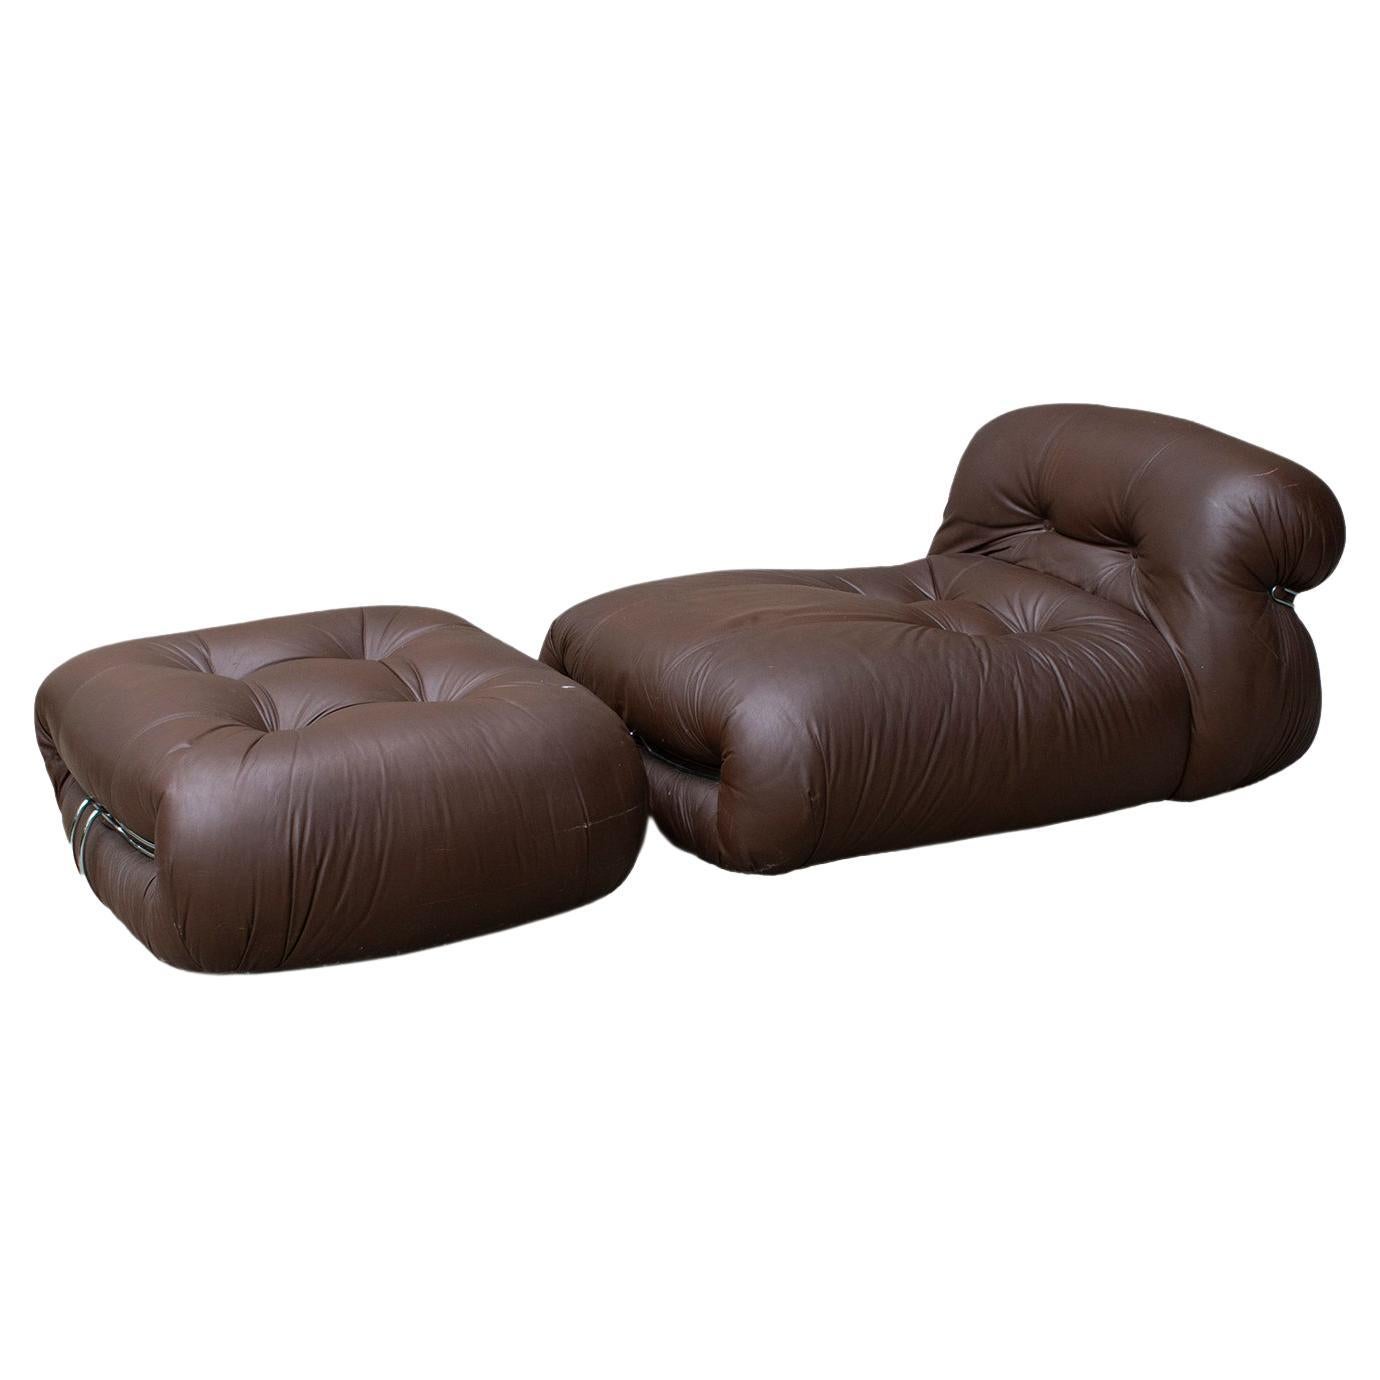 Soriana Lounge Chair & Ottoman by Tobia Scarpa for Cassina For Sale